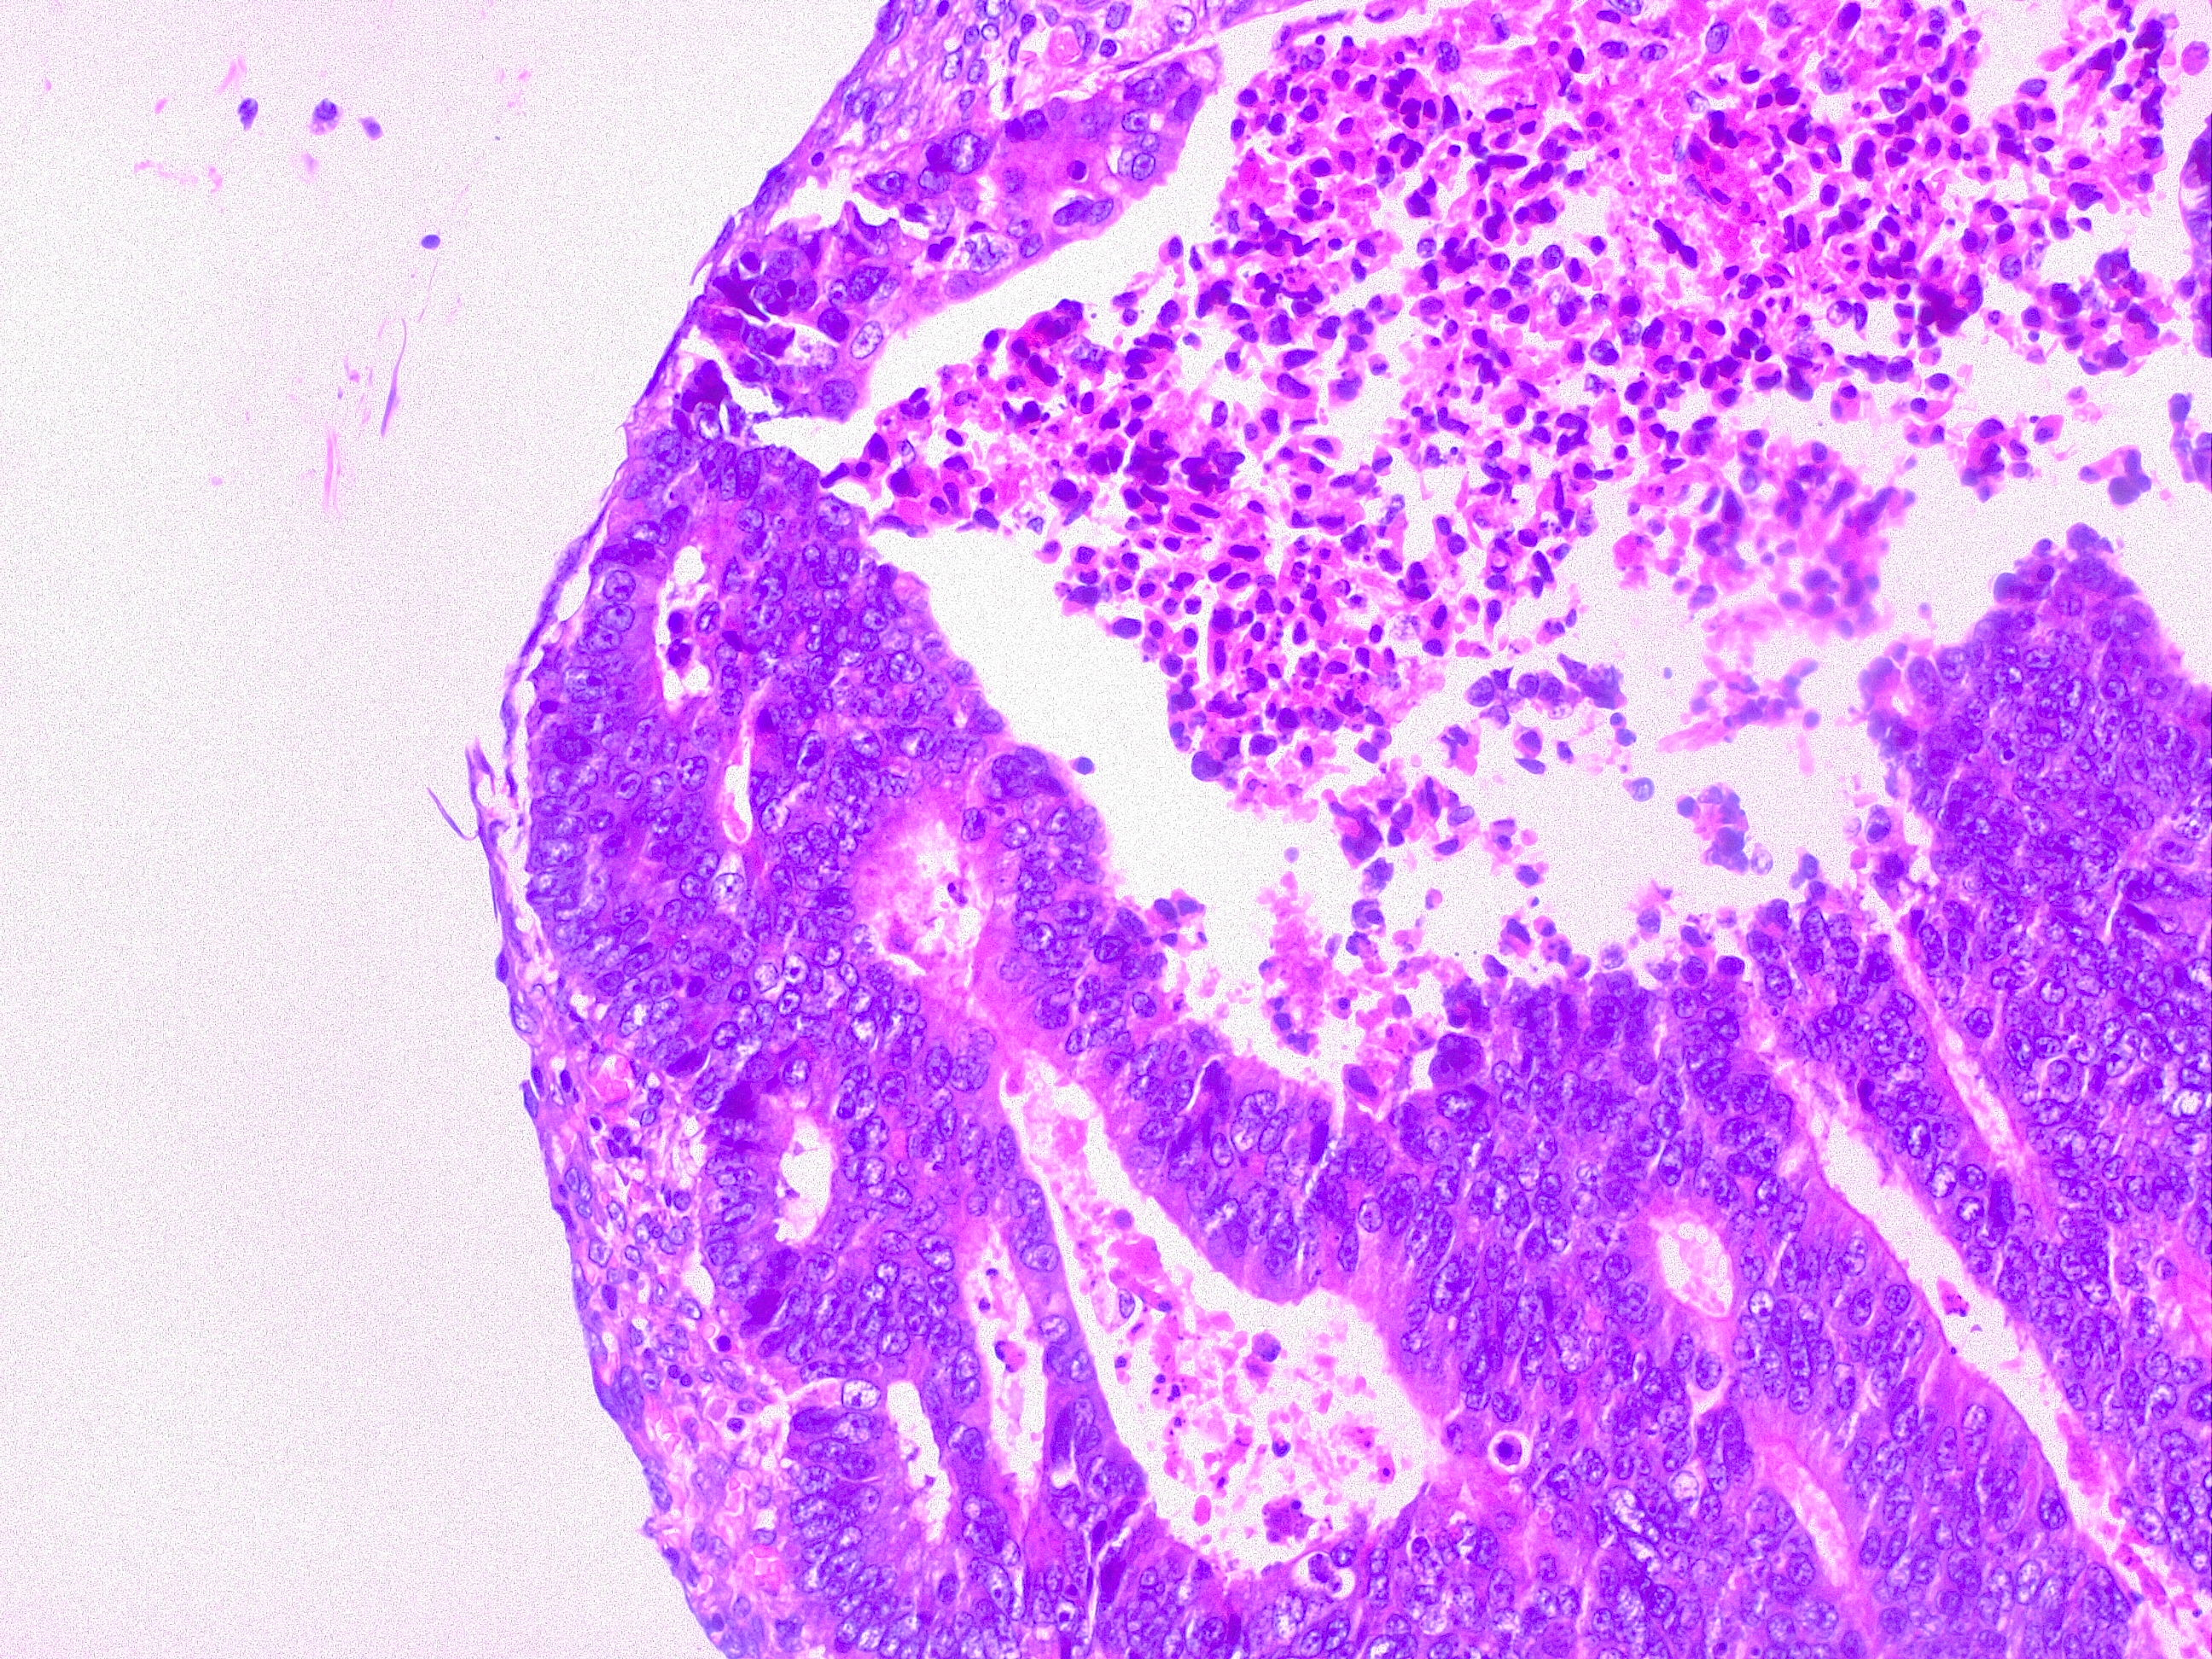 Colorectal cancer (CRC). In this image the neoplastic glands infiltrate the peritoneal mesothelium; this finding classifies as adenocarcinoma TNM stage pT4. 